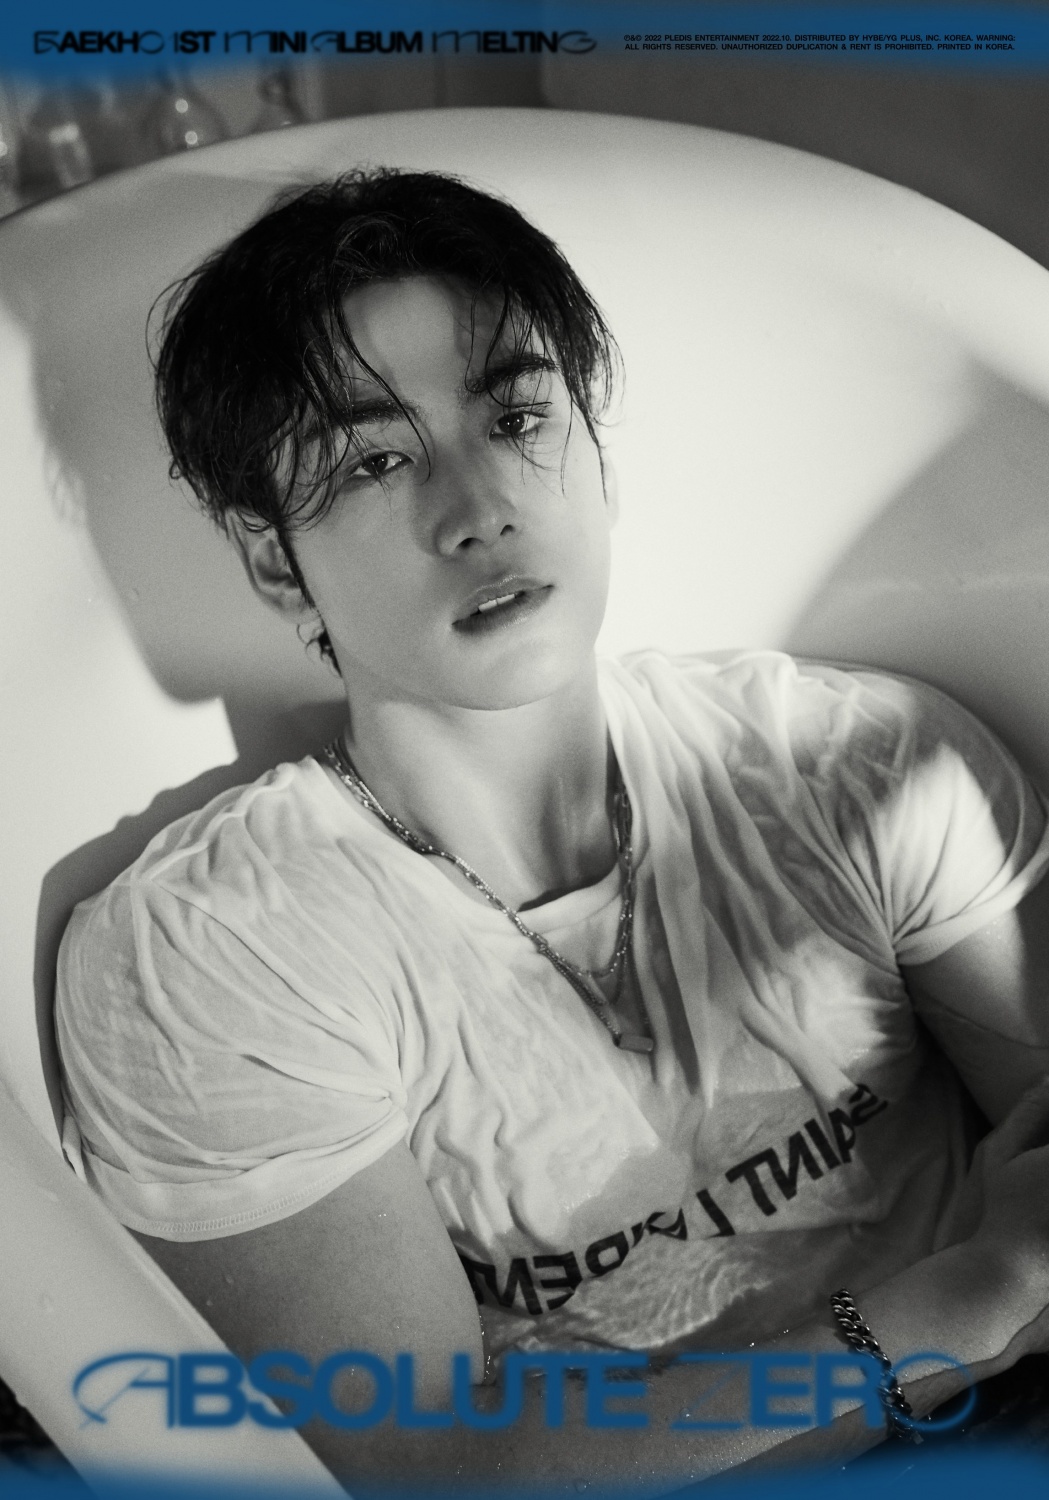 'Solo Debut' BAEKHO, 'Absolute Zero' teaser released... languid sexy visual